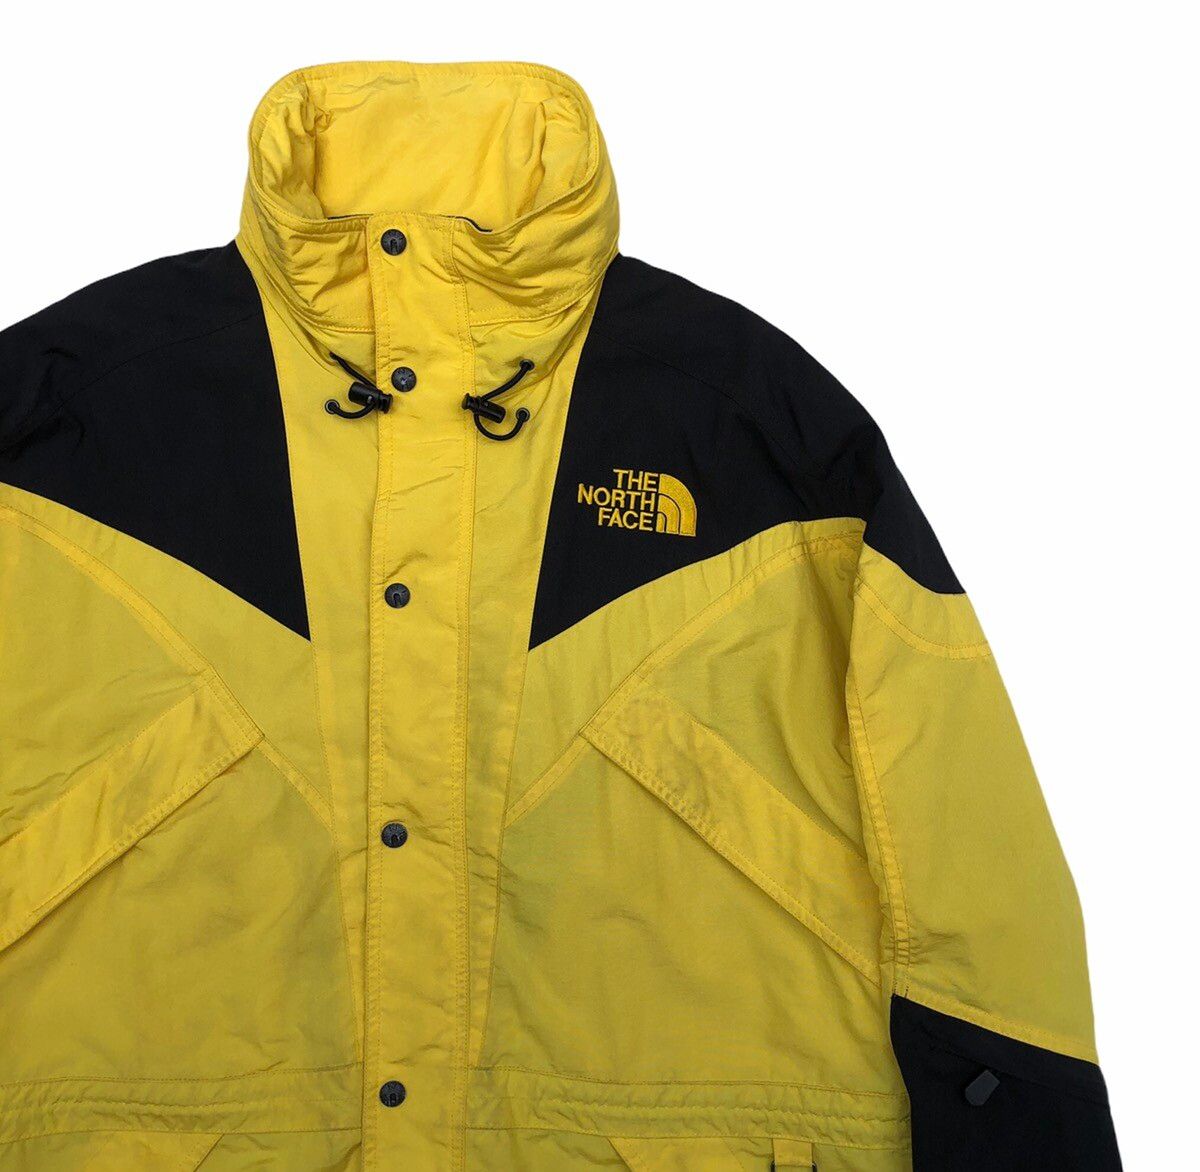 The North Face 🔥The North Face Zip Button Up Man Hooded Jacket Size US L / EU 52-54 / 3 - 2 Preview